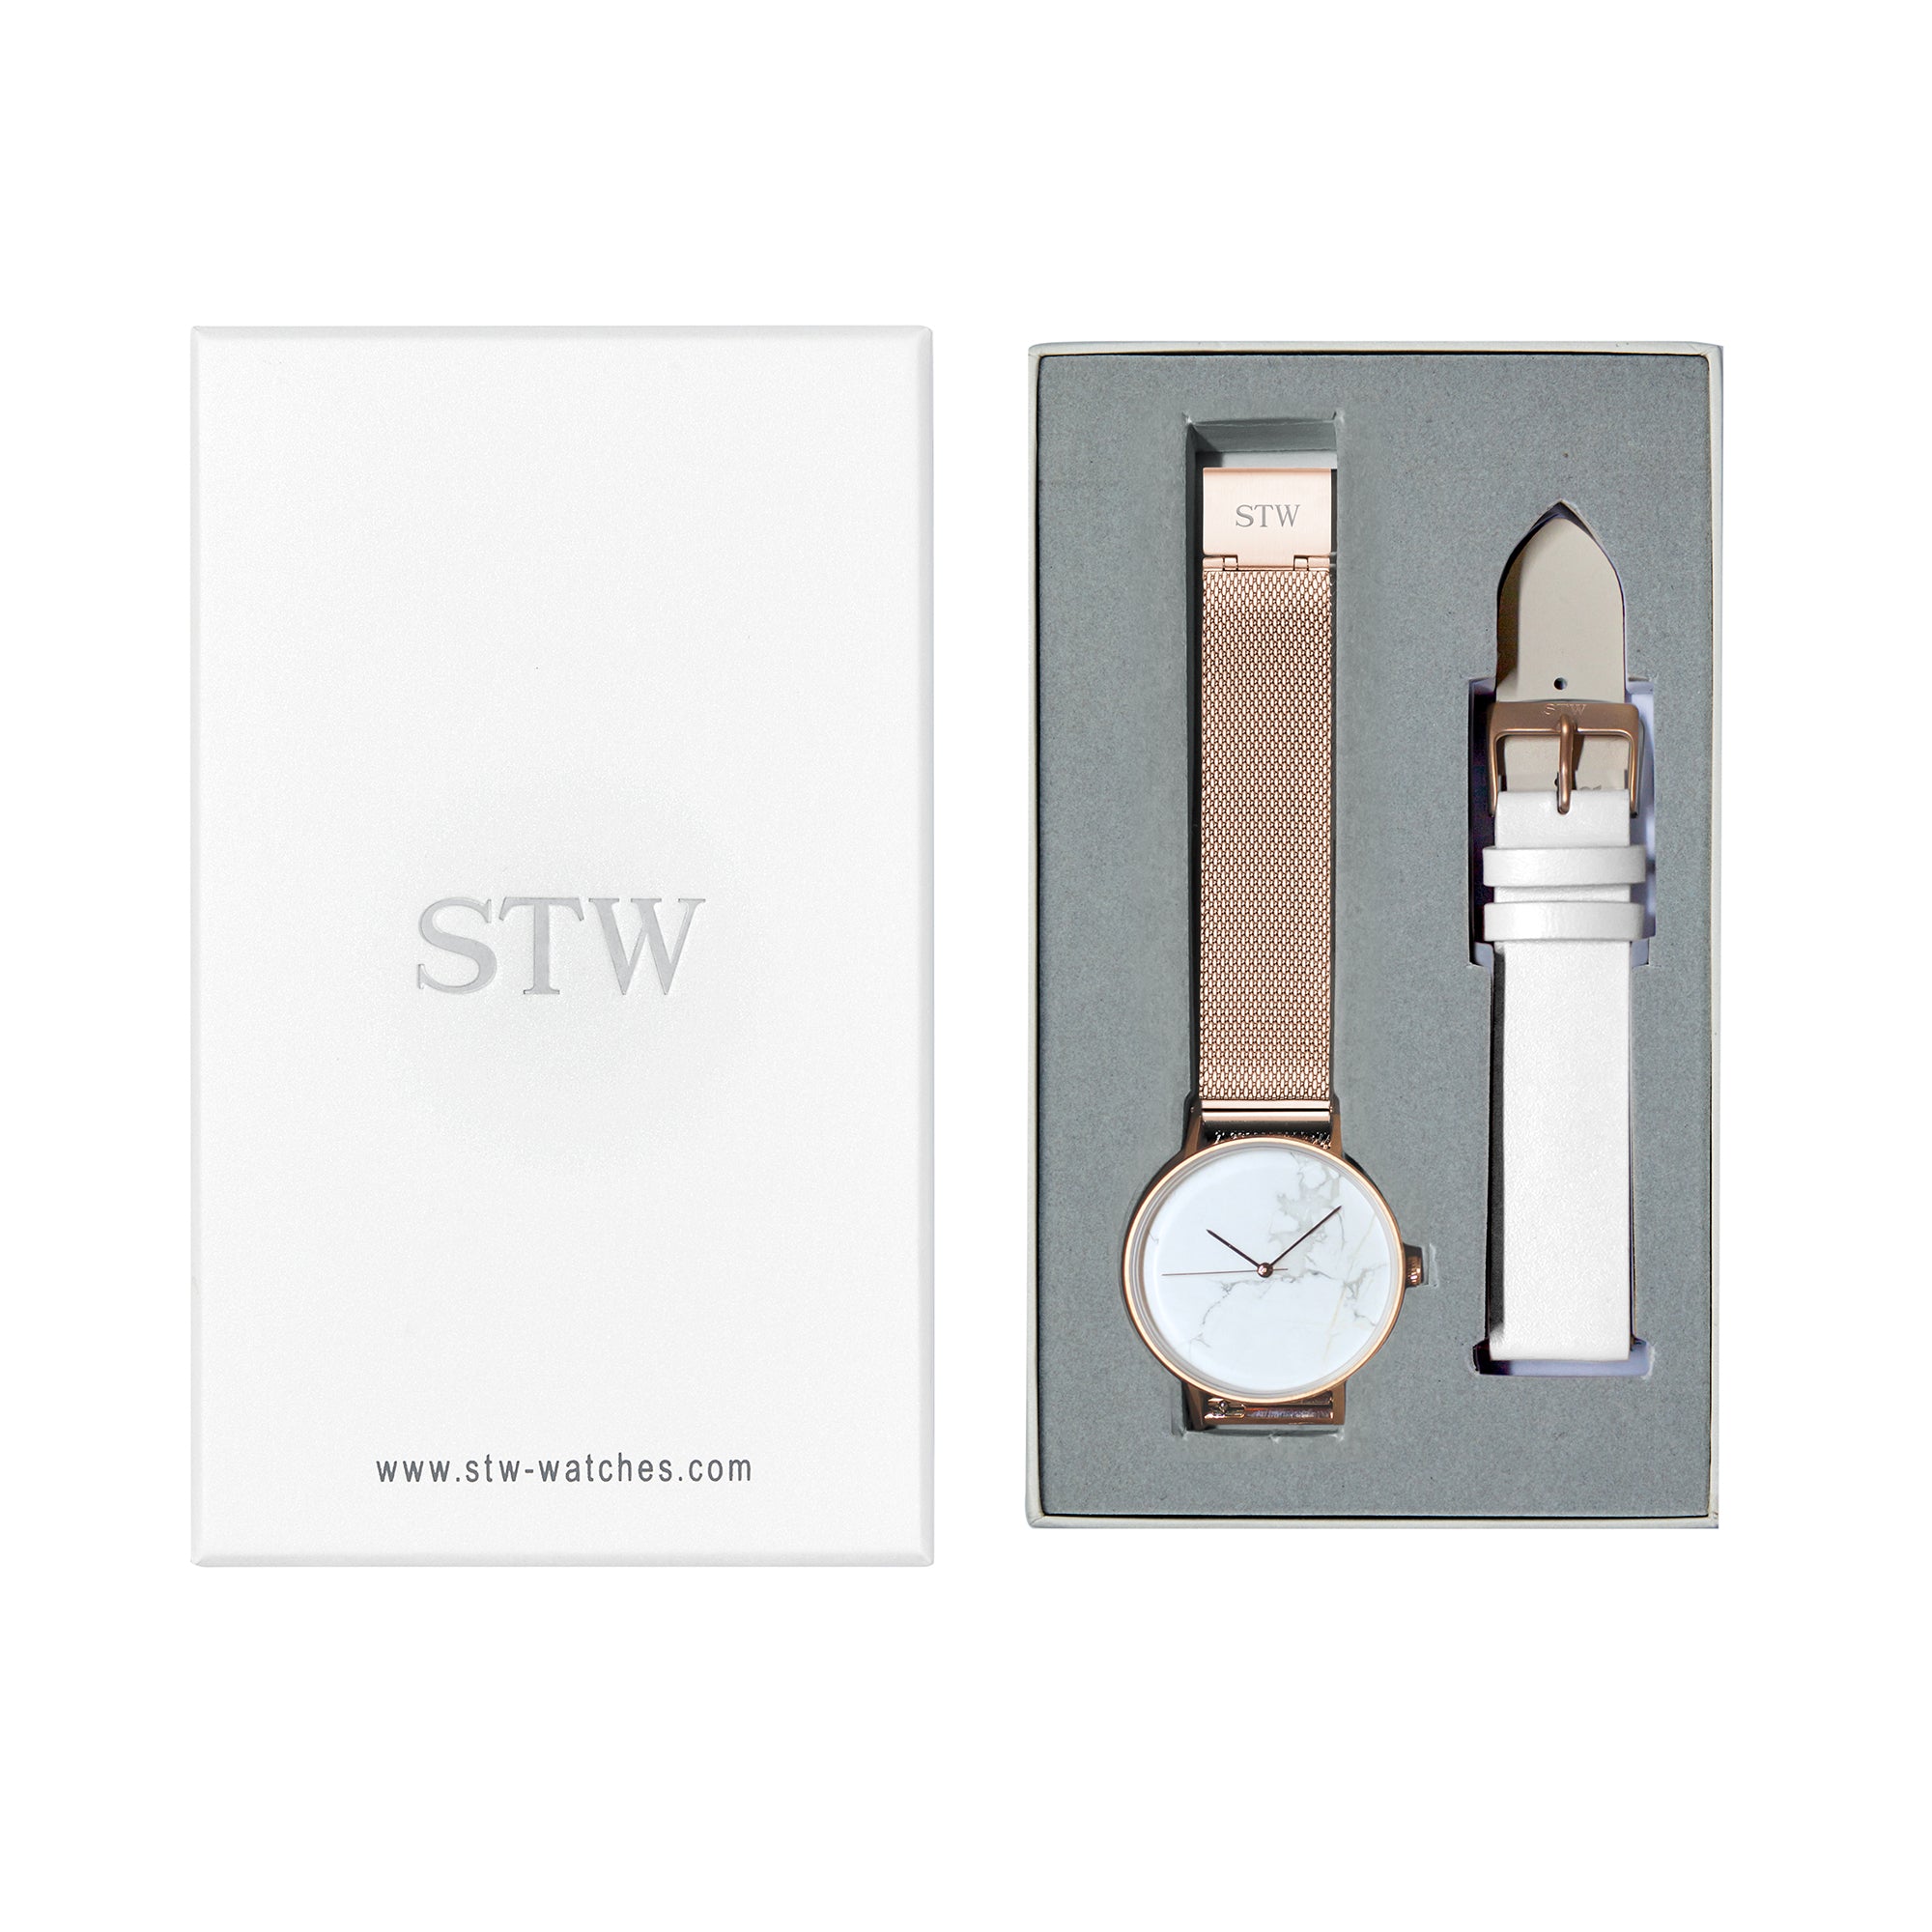 THE STONE -  WHITE MARBLE DIAL / ROSE GOLD MESH BAND WATCH